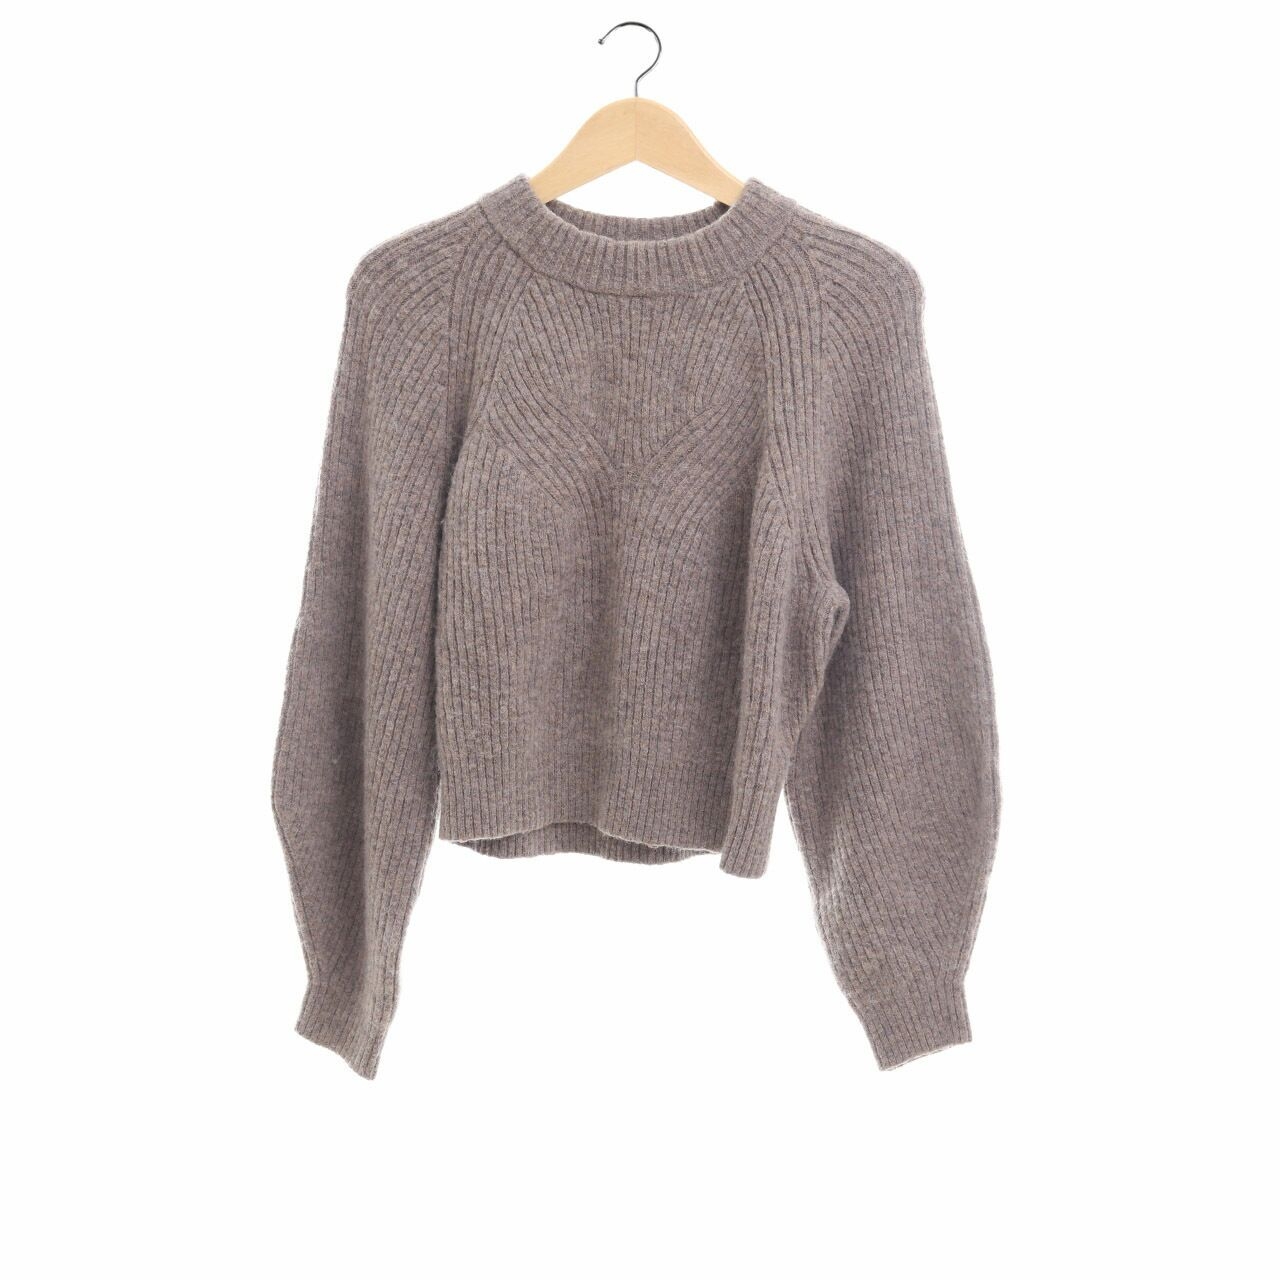 Weekday Taupe Crop Knit Sweater